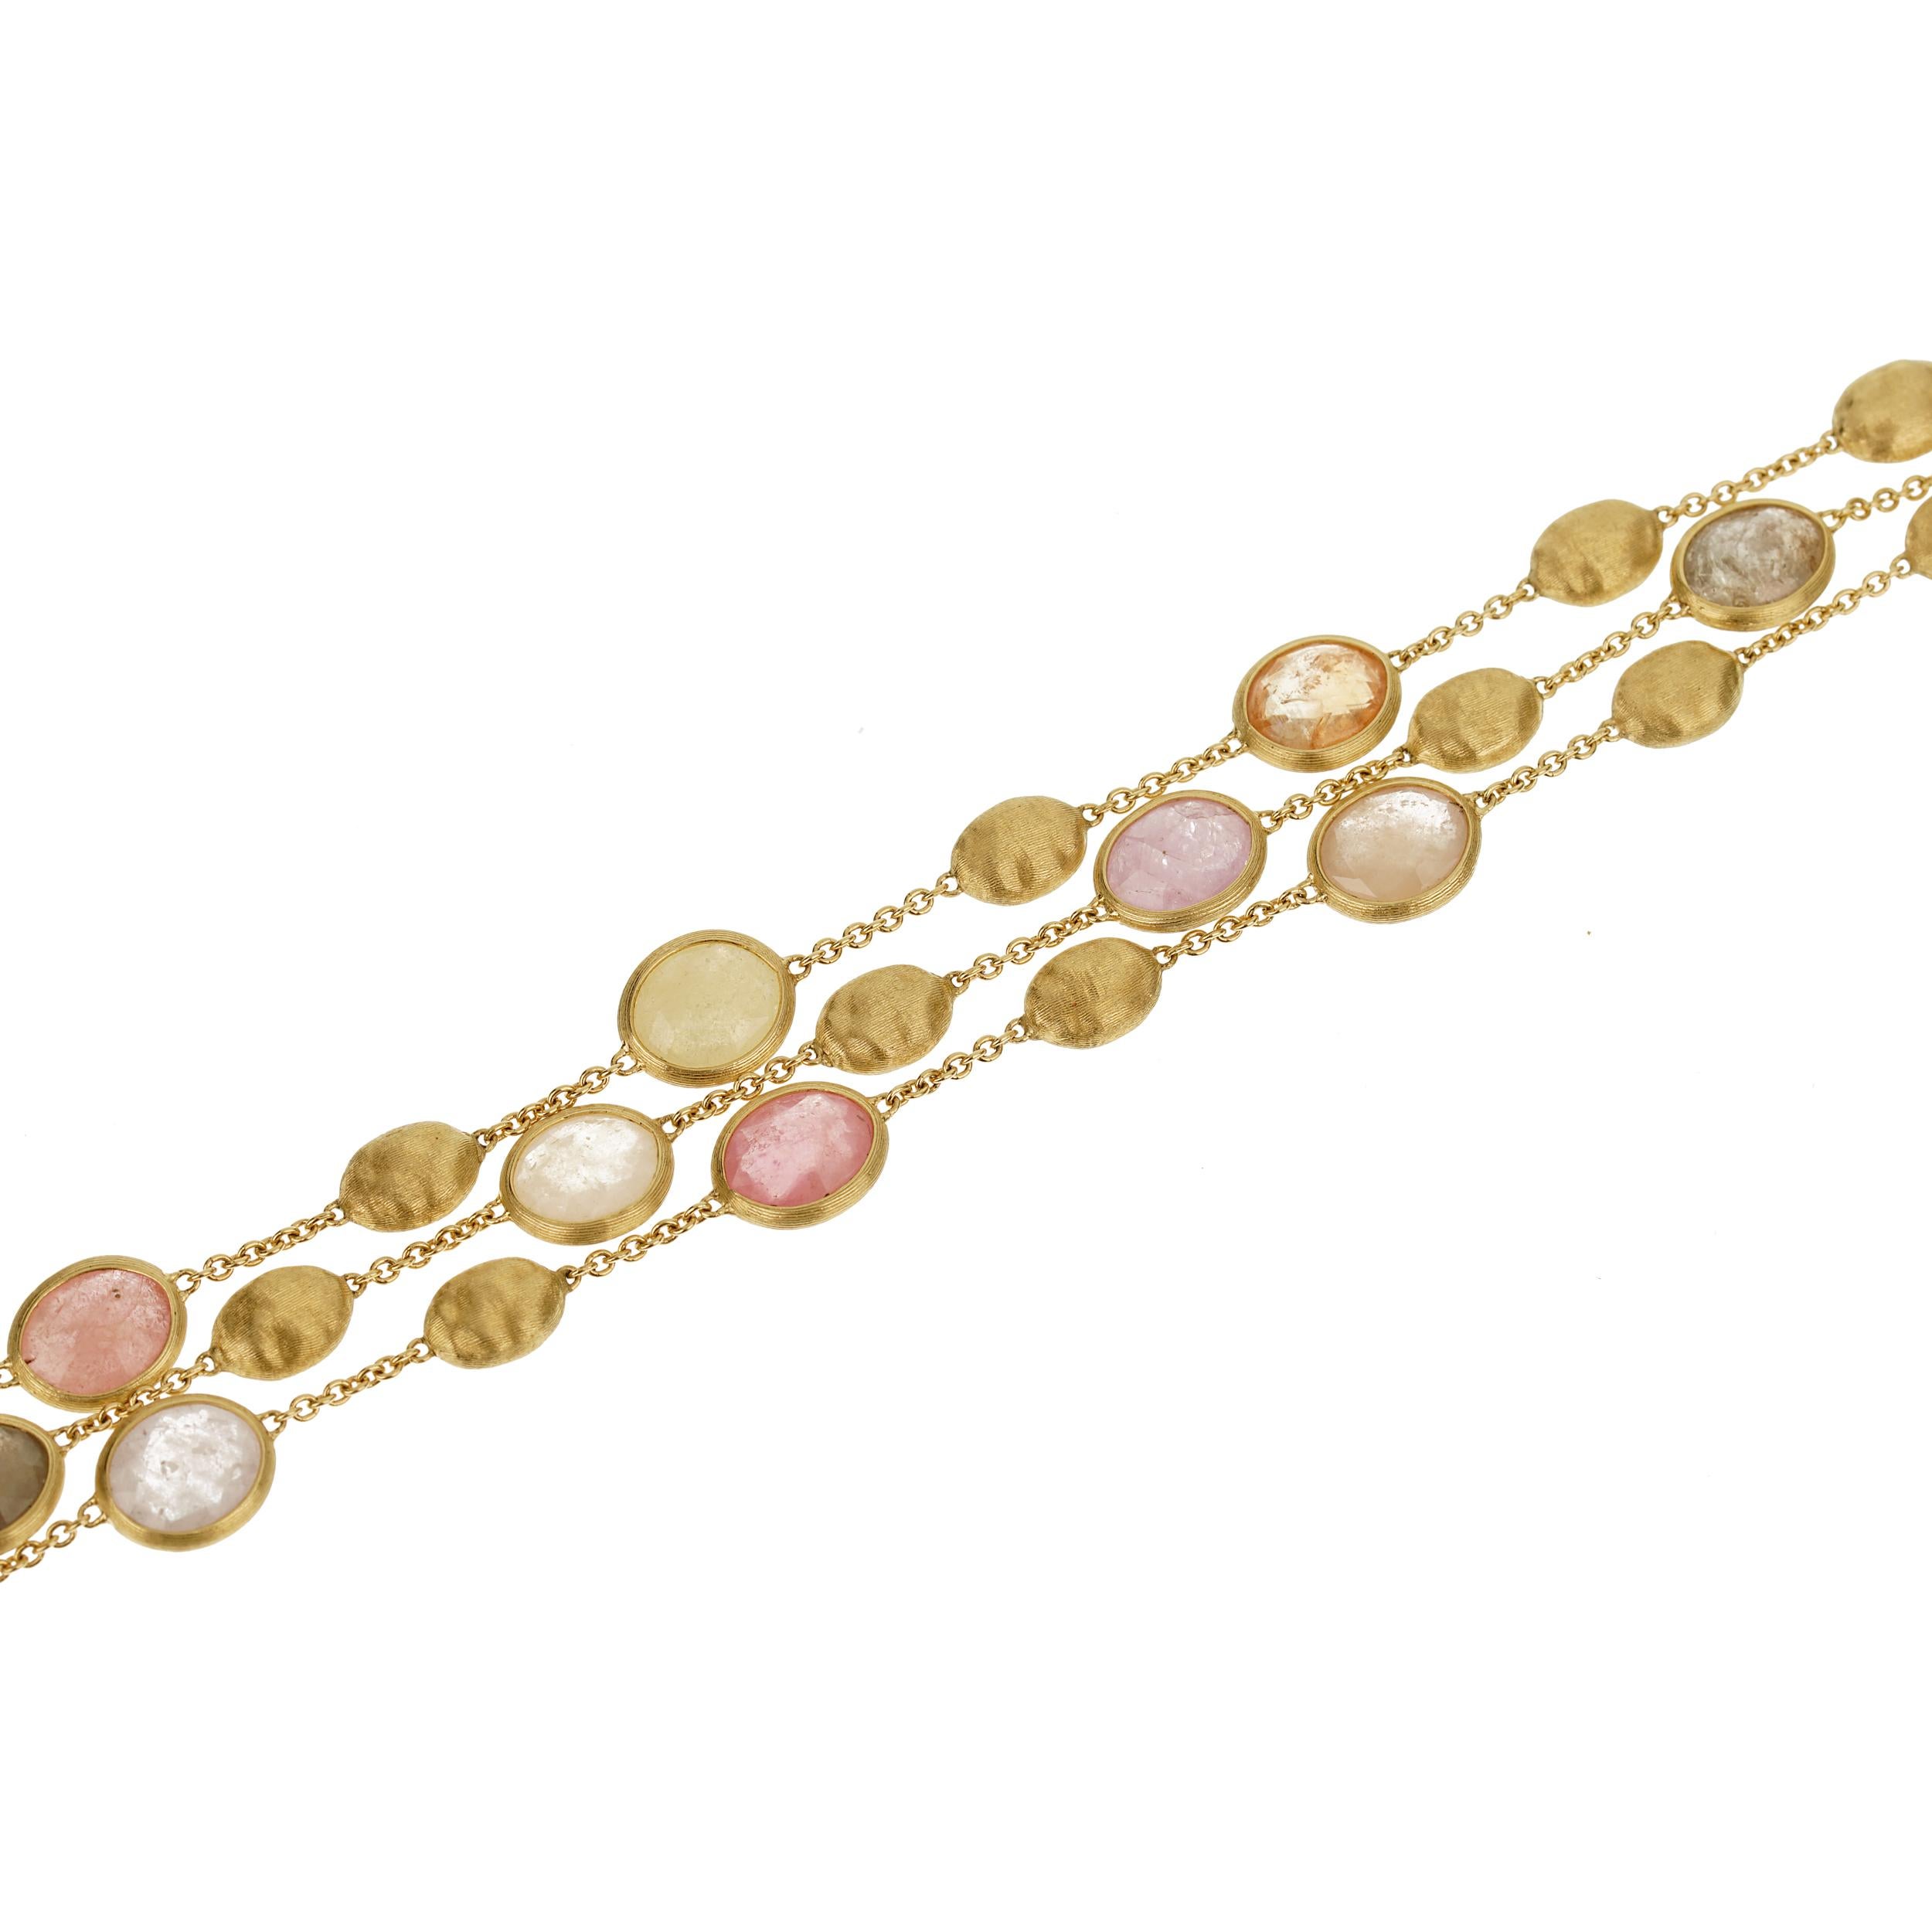 Marco Bicego Siviglia Gemstone Yellow Gold Bracelet In Good Condition For Sale In Feasterville, PA